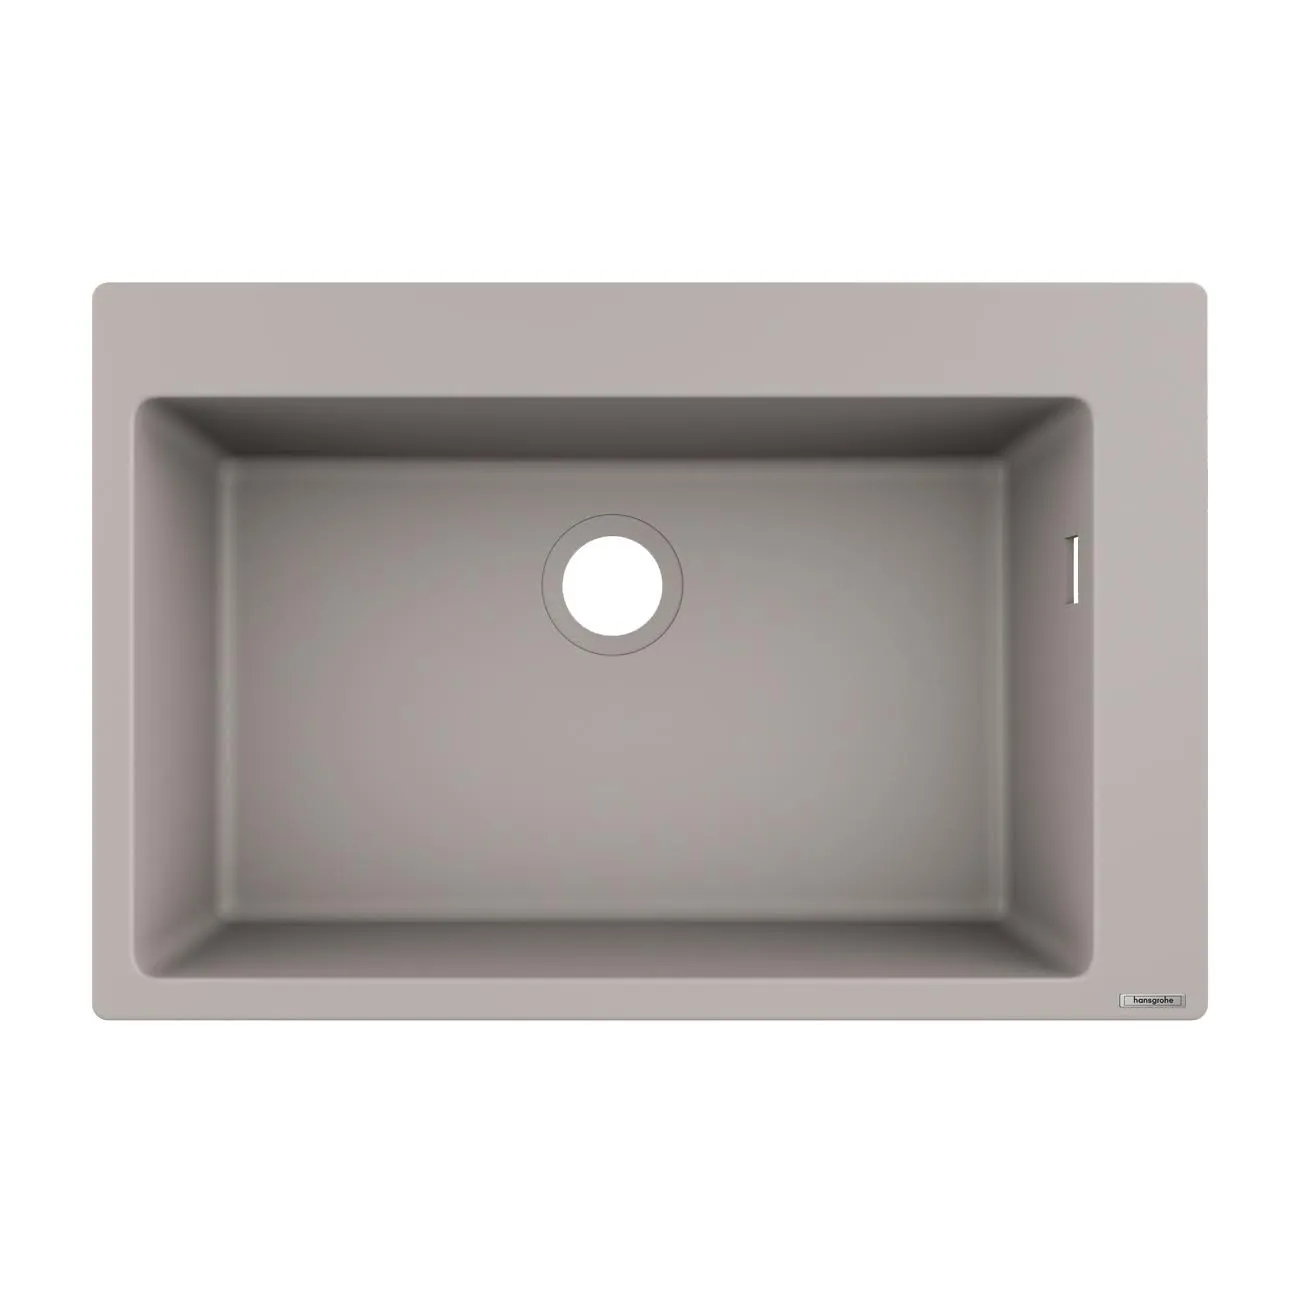 hansgrohe S51 Concrete Grey SilicaTec Inset Kitchen Sink - 1 Bowl S510-F660